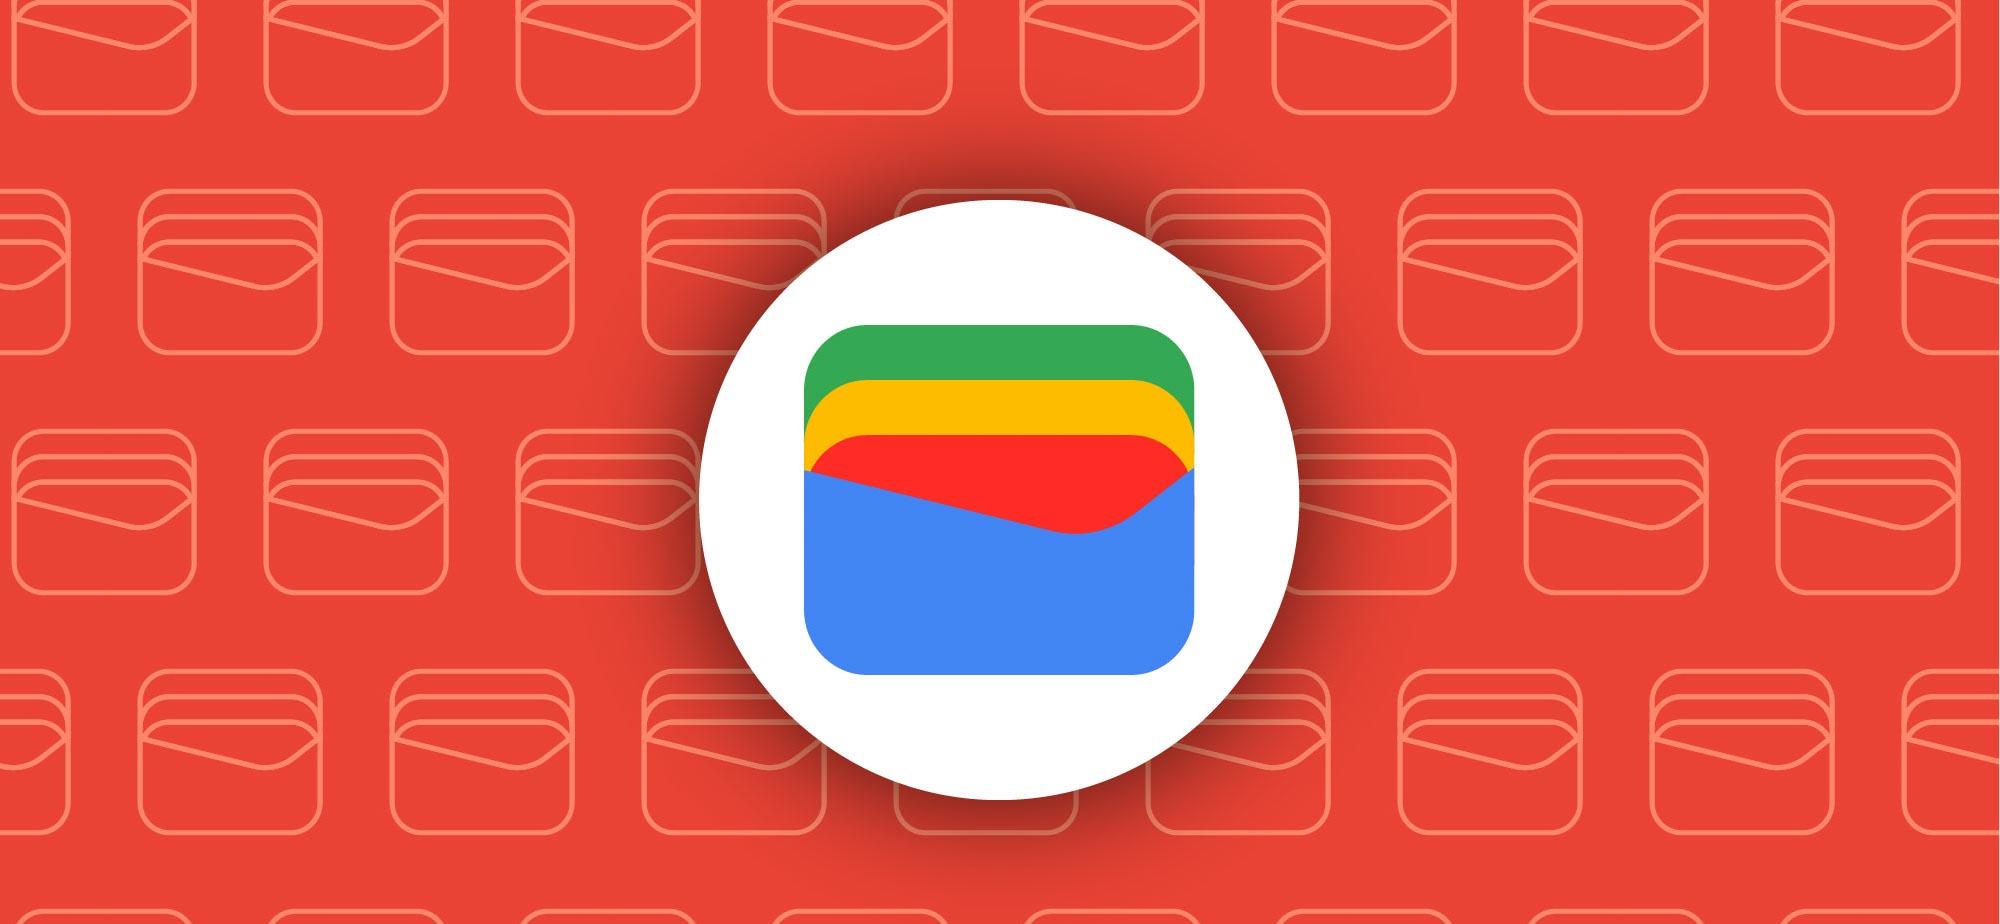 Google Wallet Introduces Manual Archiving Feature for Passes